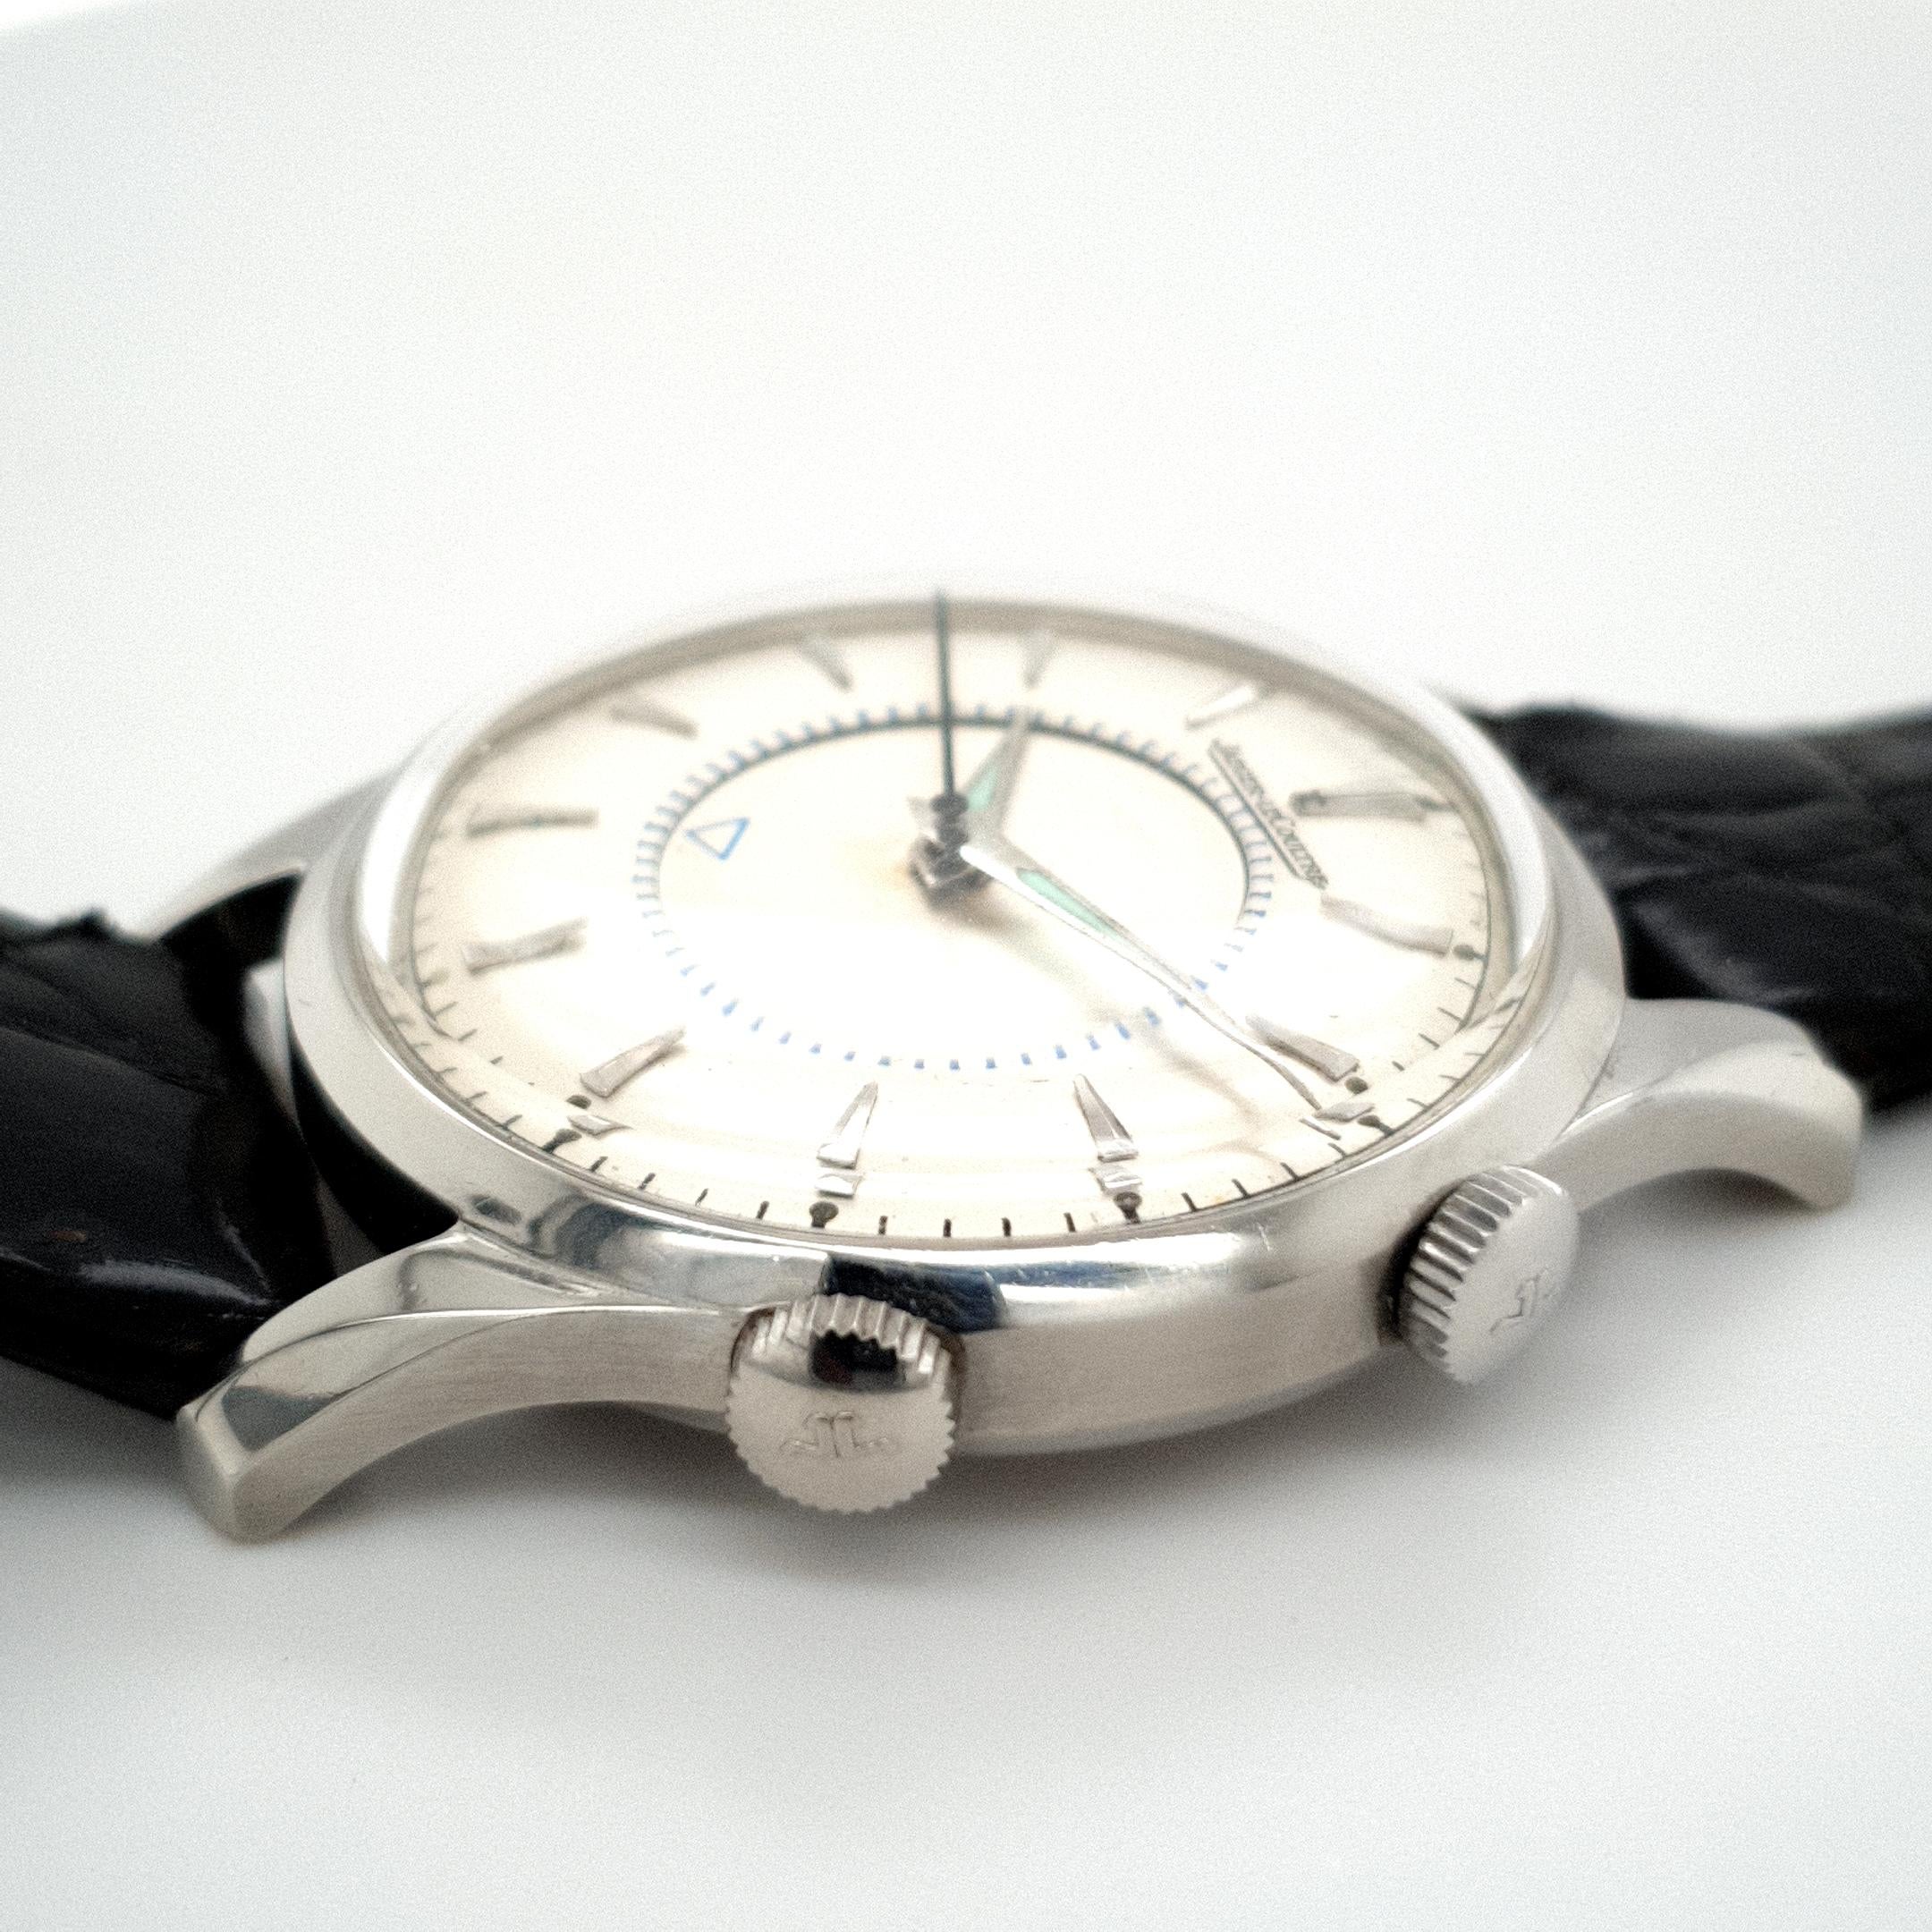 Jaeger-LeCoultre, Wrist Alarm/ Memovox, Caliber: P489/1, Movement Nr. 1067615 In Excellent Condition For Sale In Antwerp, BE